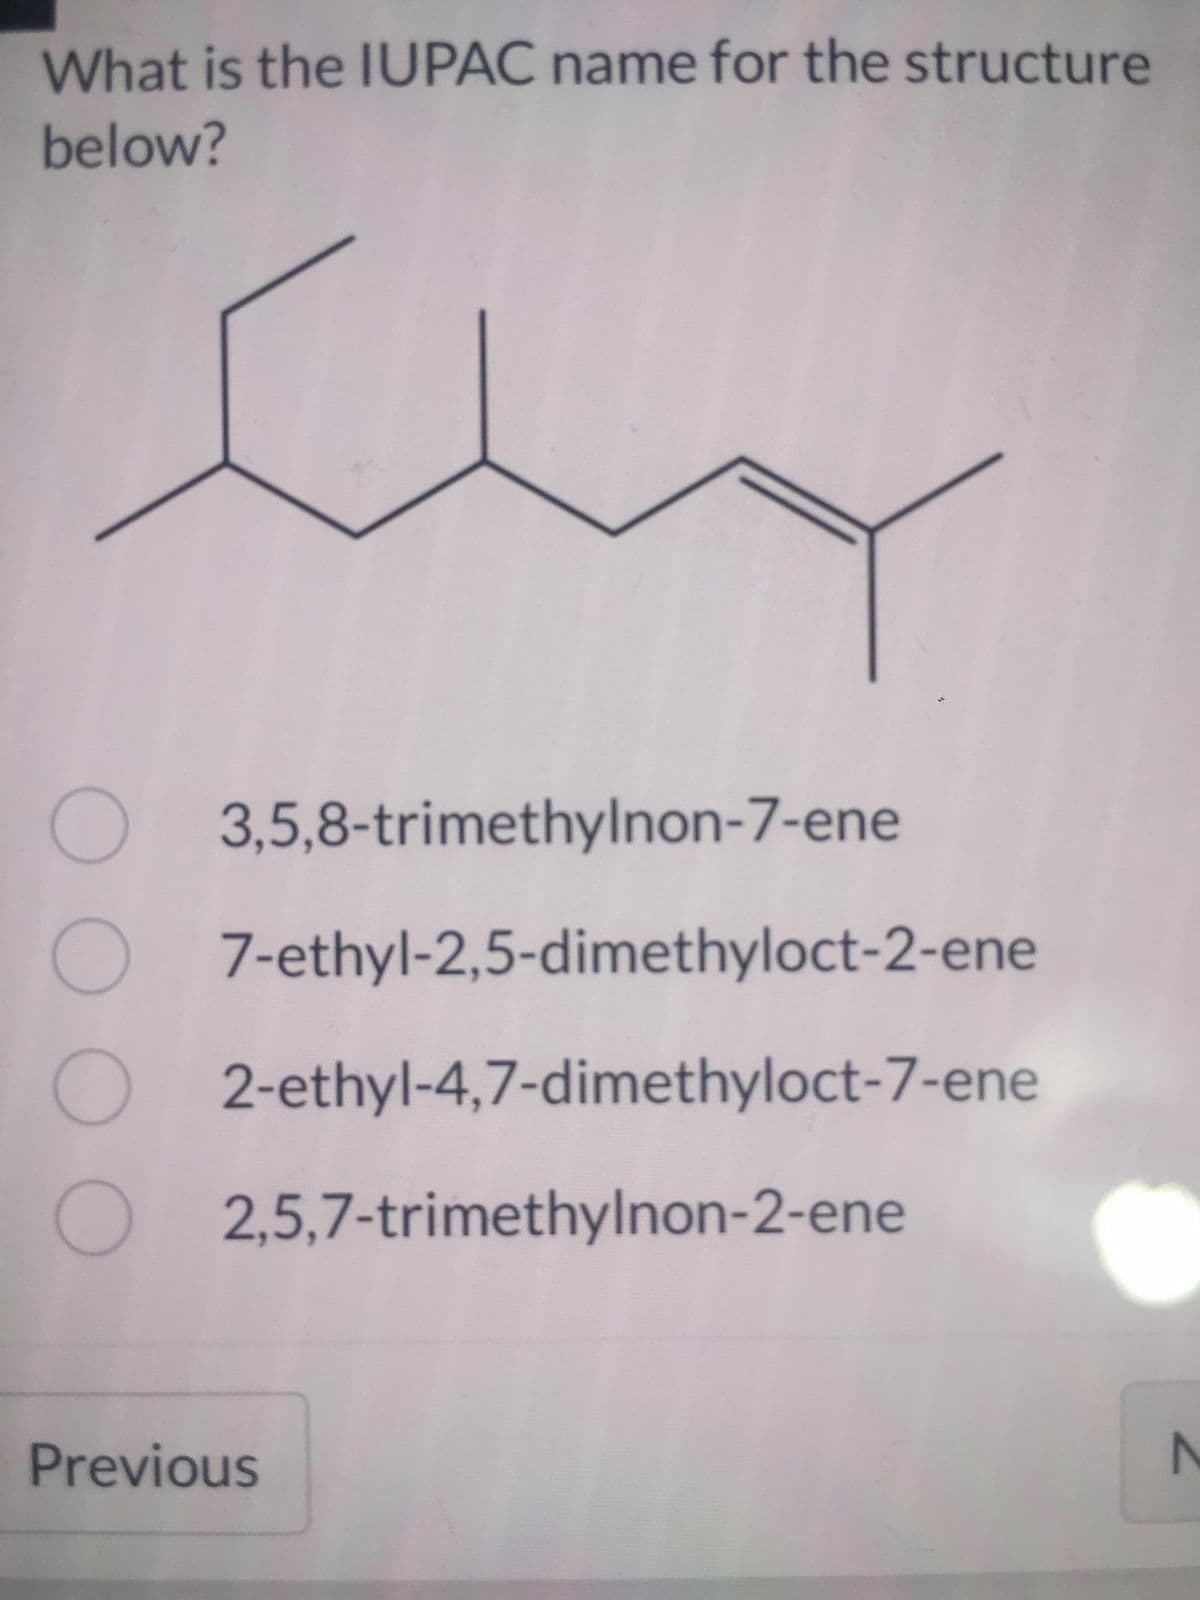 What is the IUPAC name for the structure
below?
Shy
O3,5,8-trimethylnon-7-ene
O7-ethyl-2,5-dimethyloct-2-ene
O2-ethyl-4,7-dimethyloct-7-ene
O2,5,7-trimethylnon-2-ene
Previous